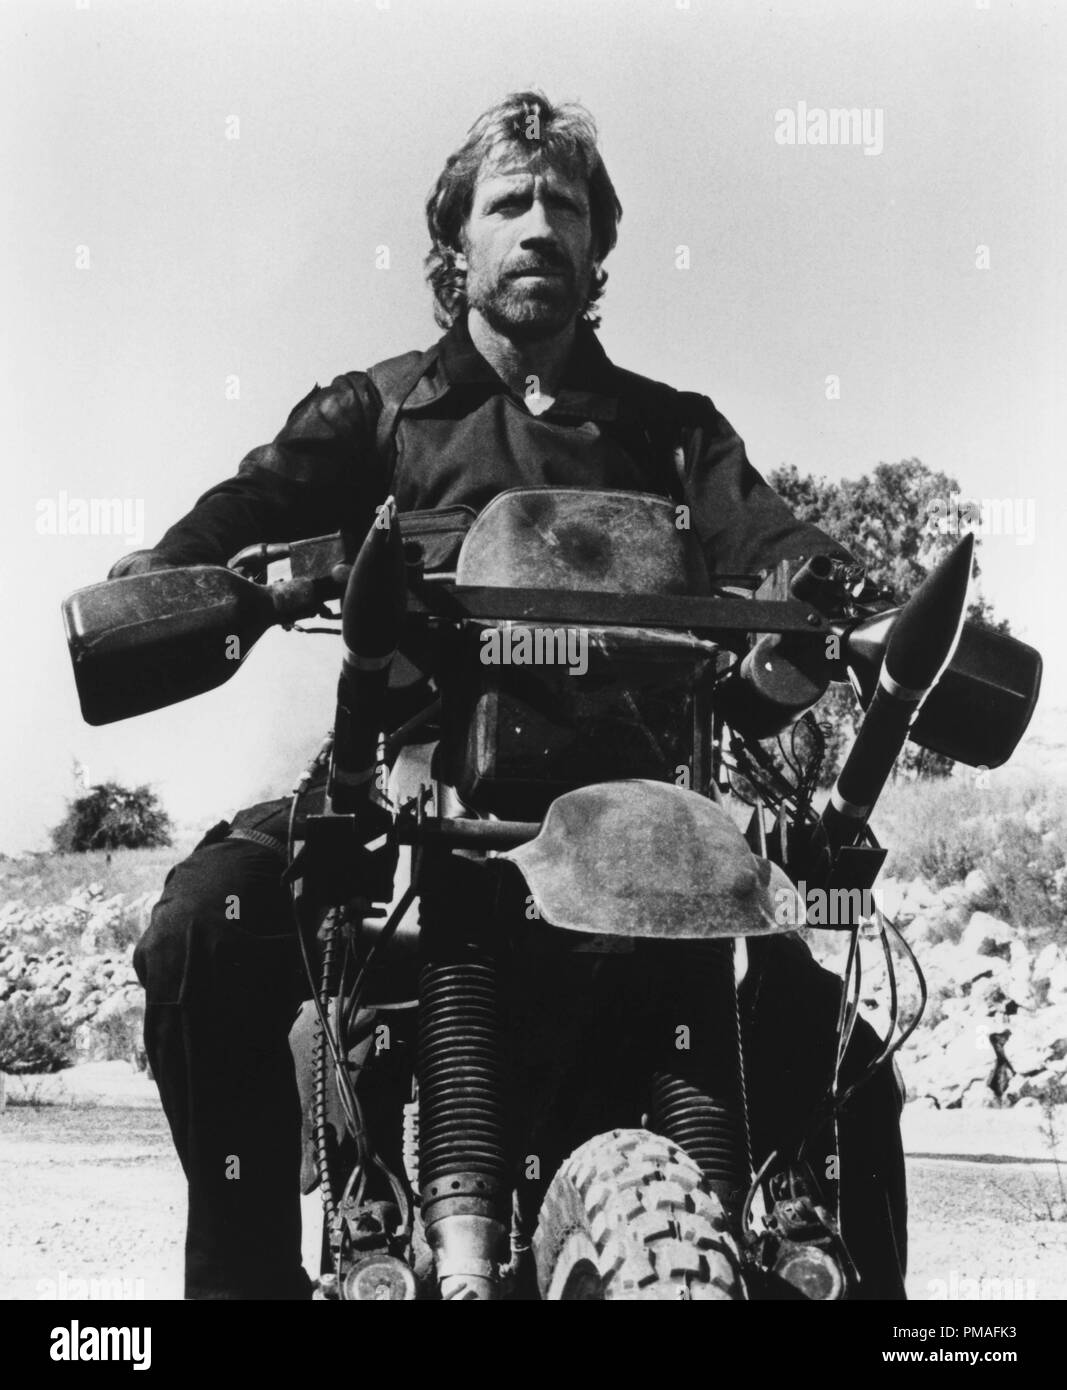 Chuck Norris in 'The Delta Force', 1986 Golan Globus Productions File Reference # 32633 667THA Stock Photo